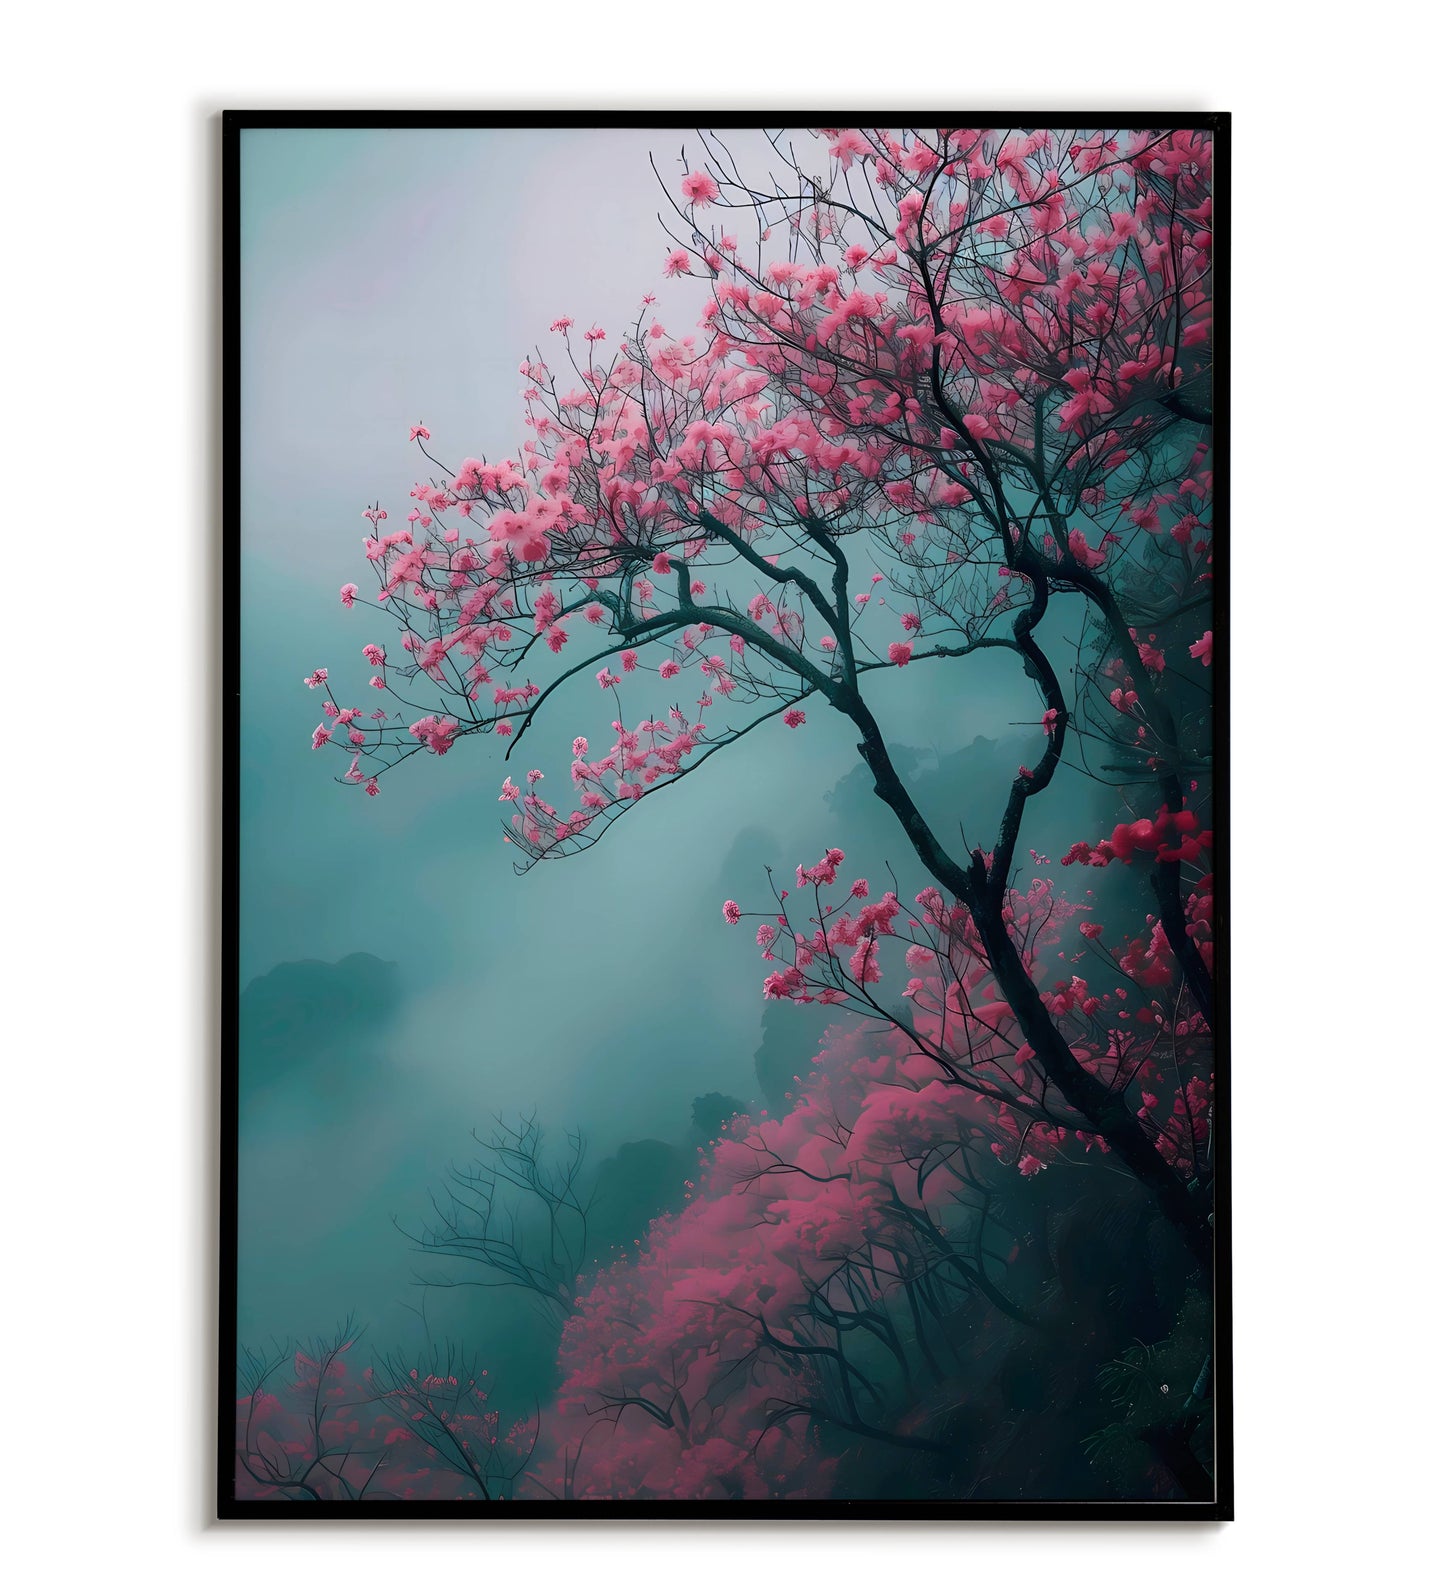 Blossom by the hill - Printable Wall Art / Poster. Download this captivating image to add a touch of nature to your decor.